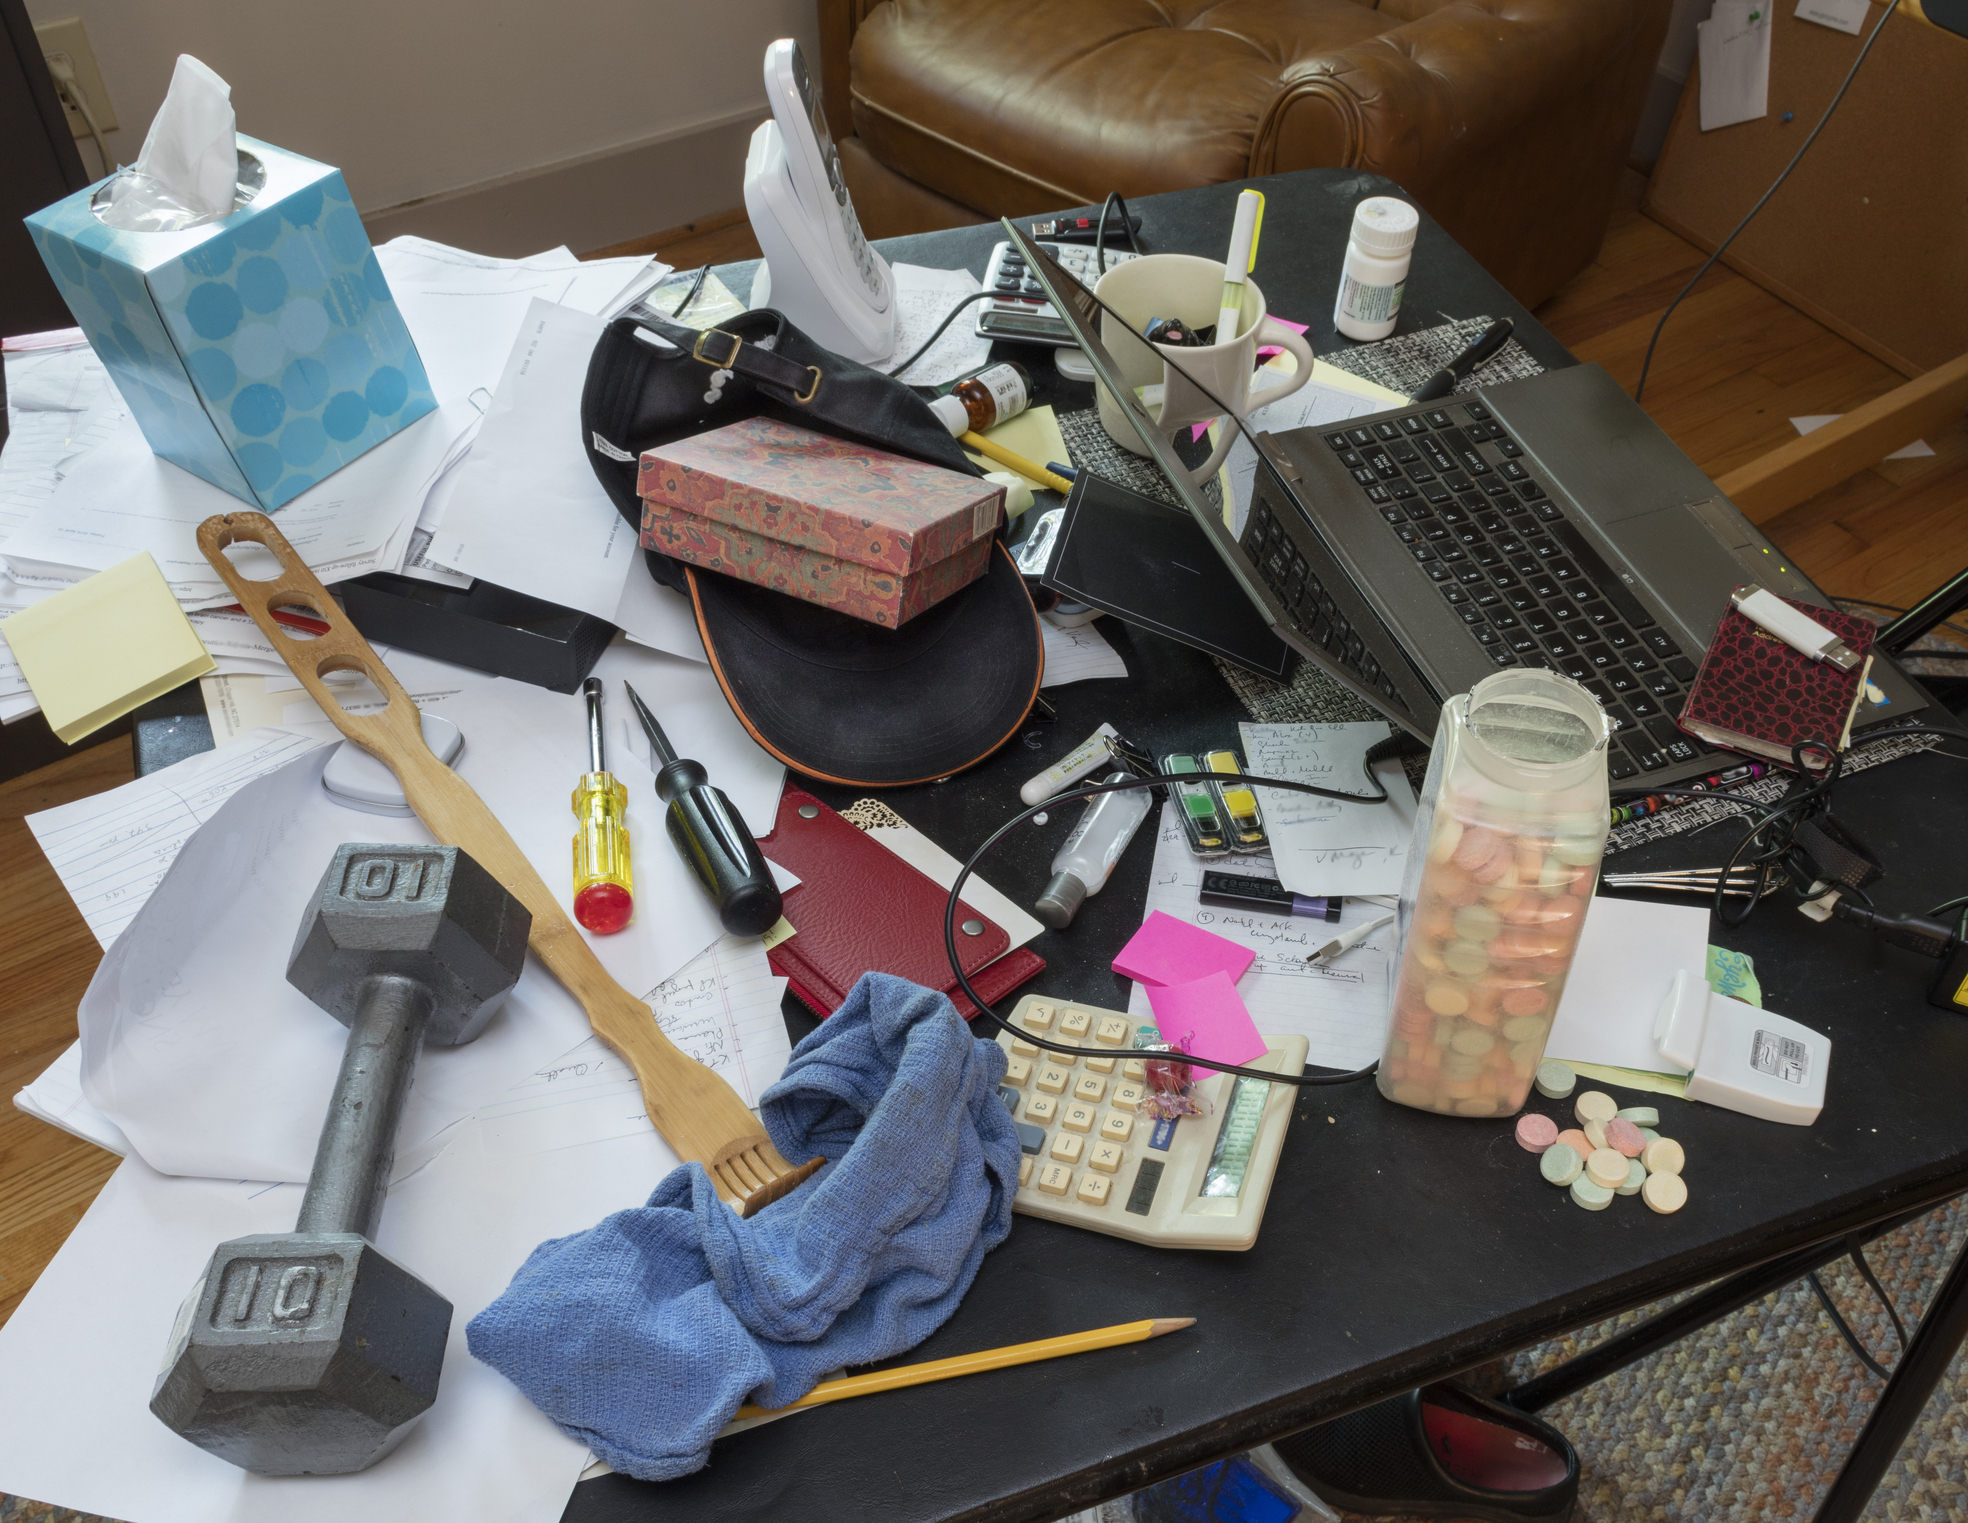 A cluttered desk includes a laptop, tissues, dumbbell, calculator, various papers, a screwdriver, and a container of candy